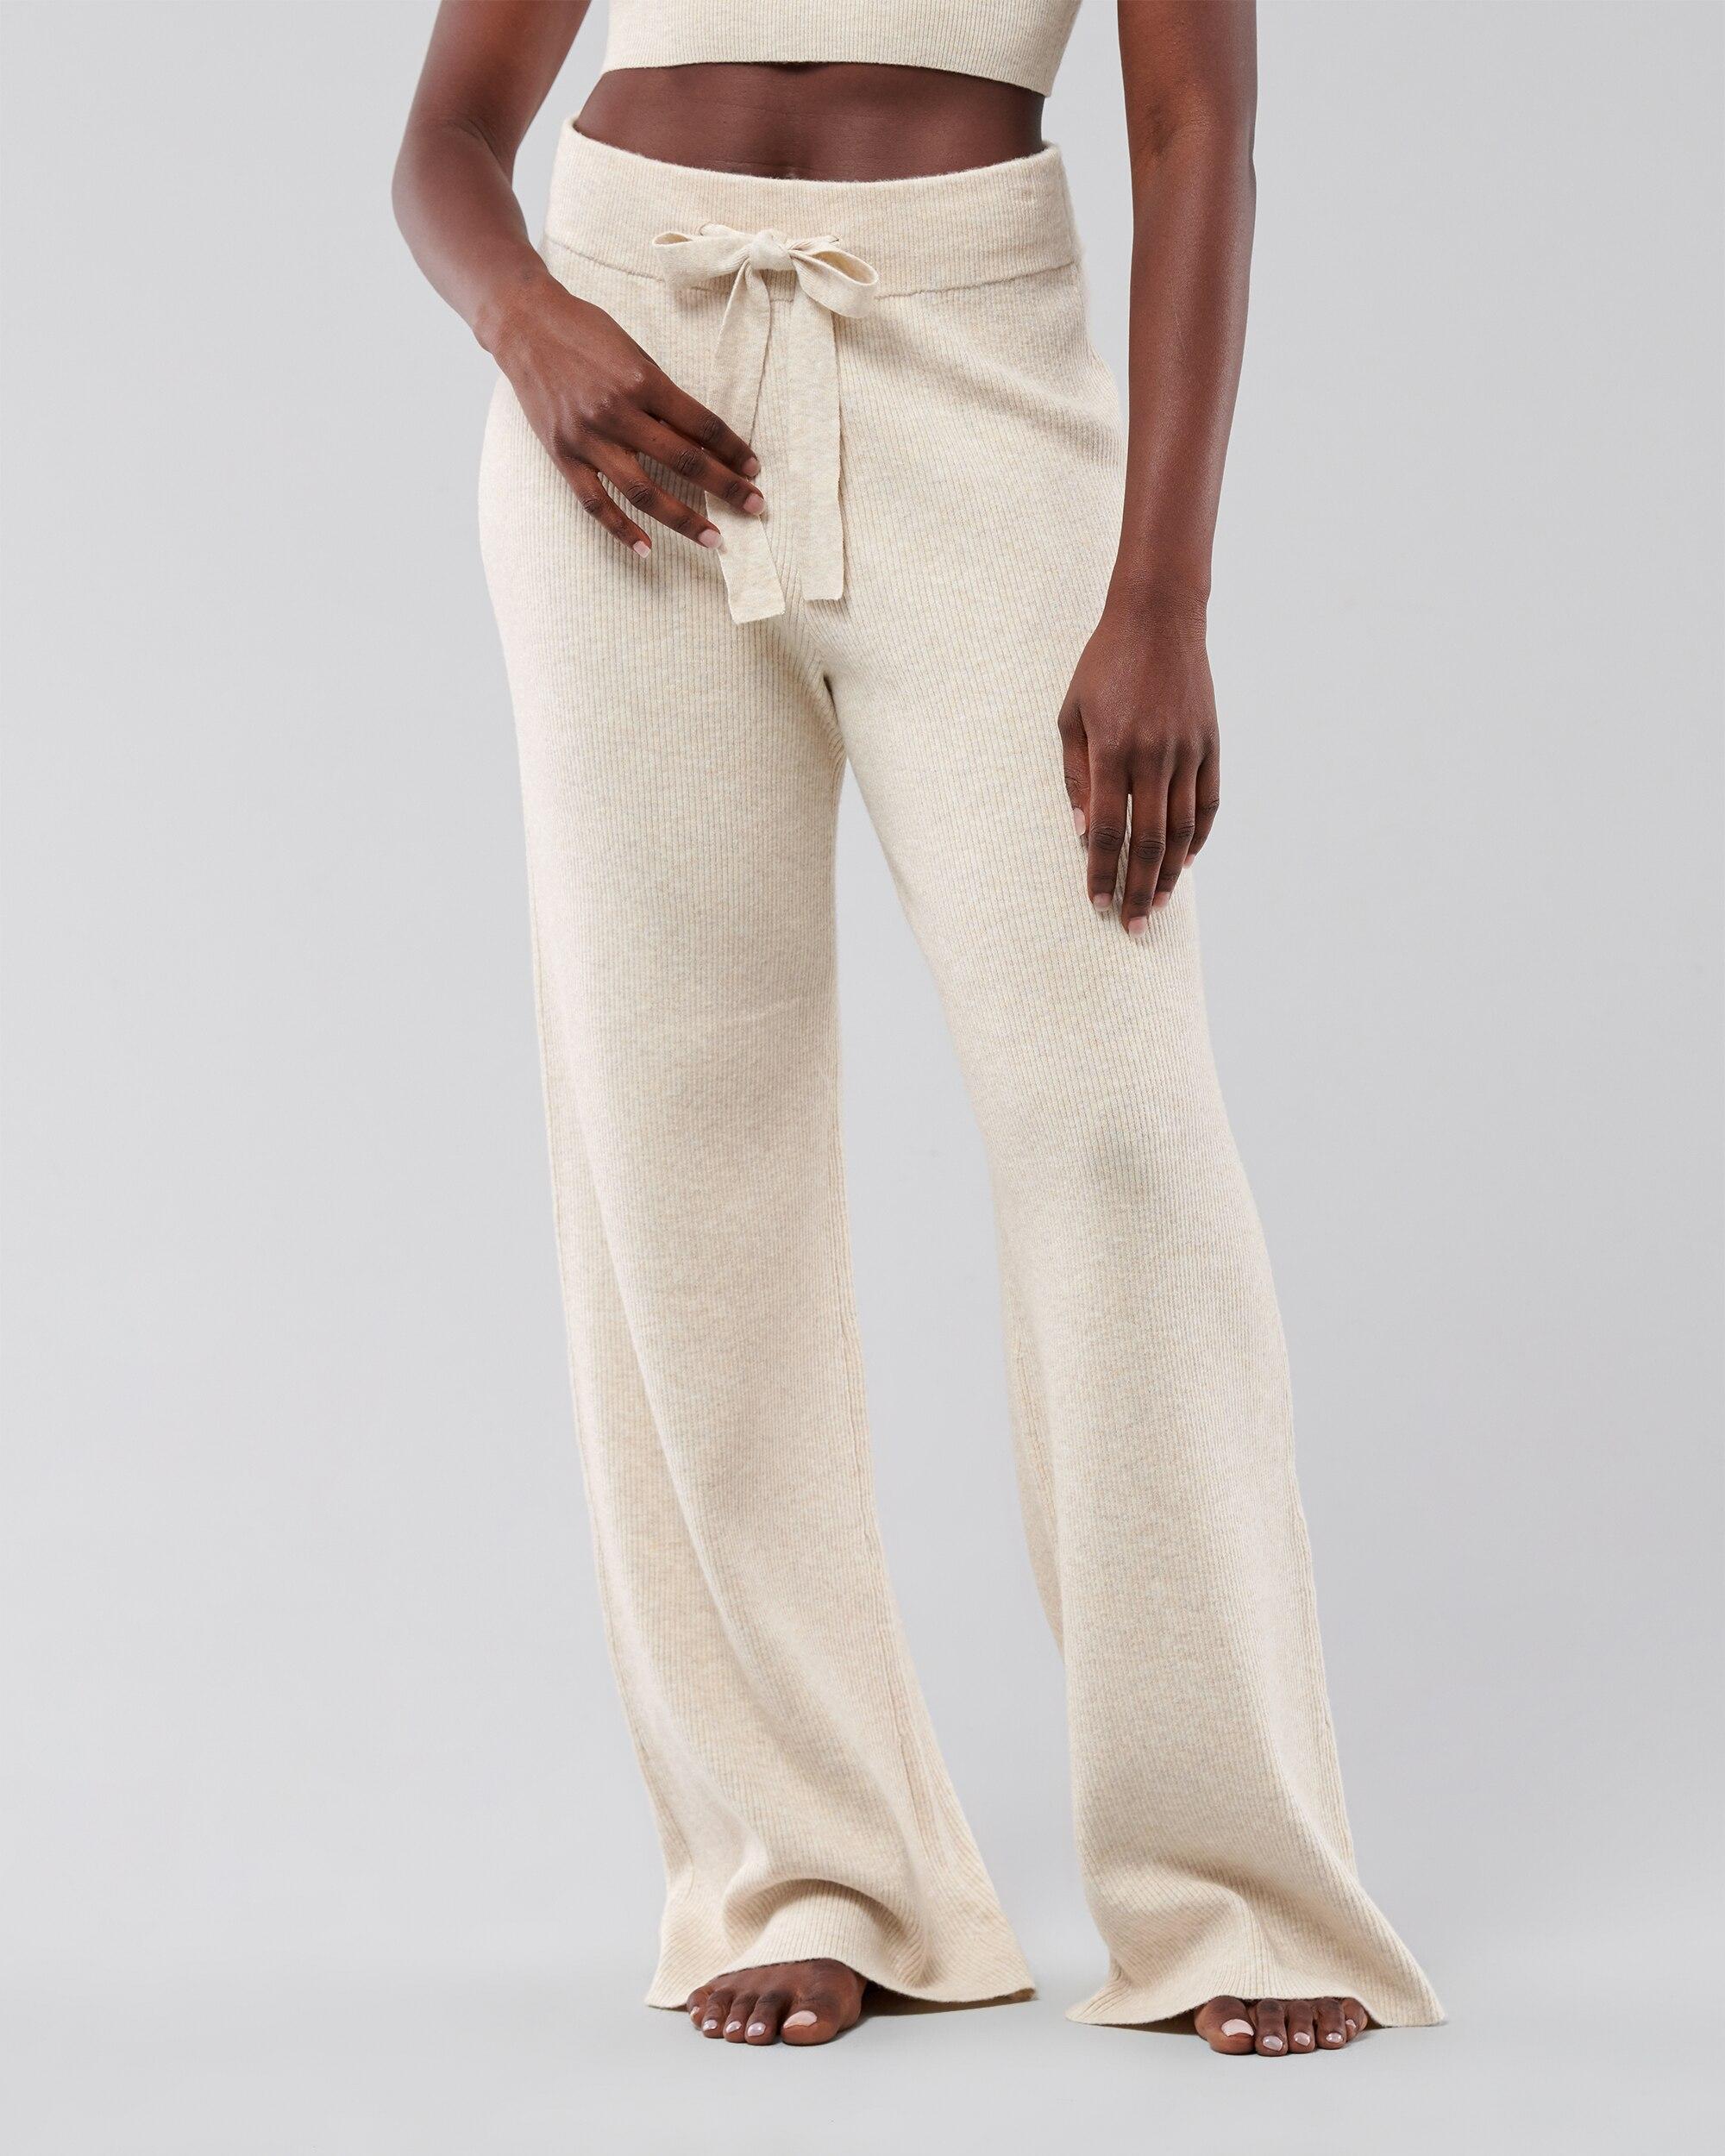 Hollister Gilly Hicks Sweater Knit Wide Leg Pants in Natural | Lyst UK